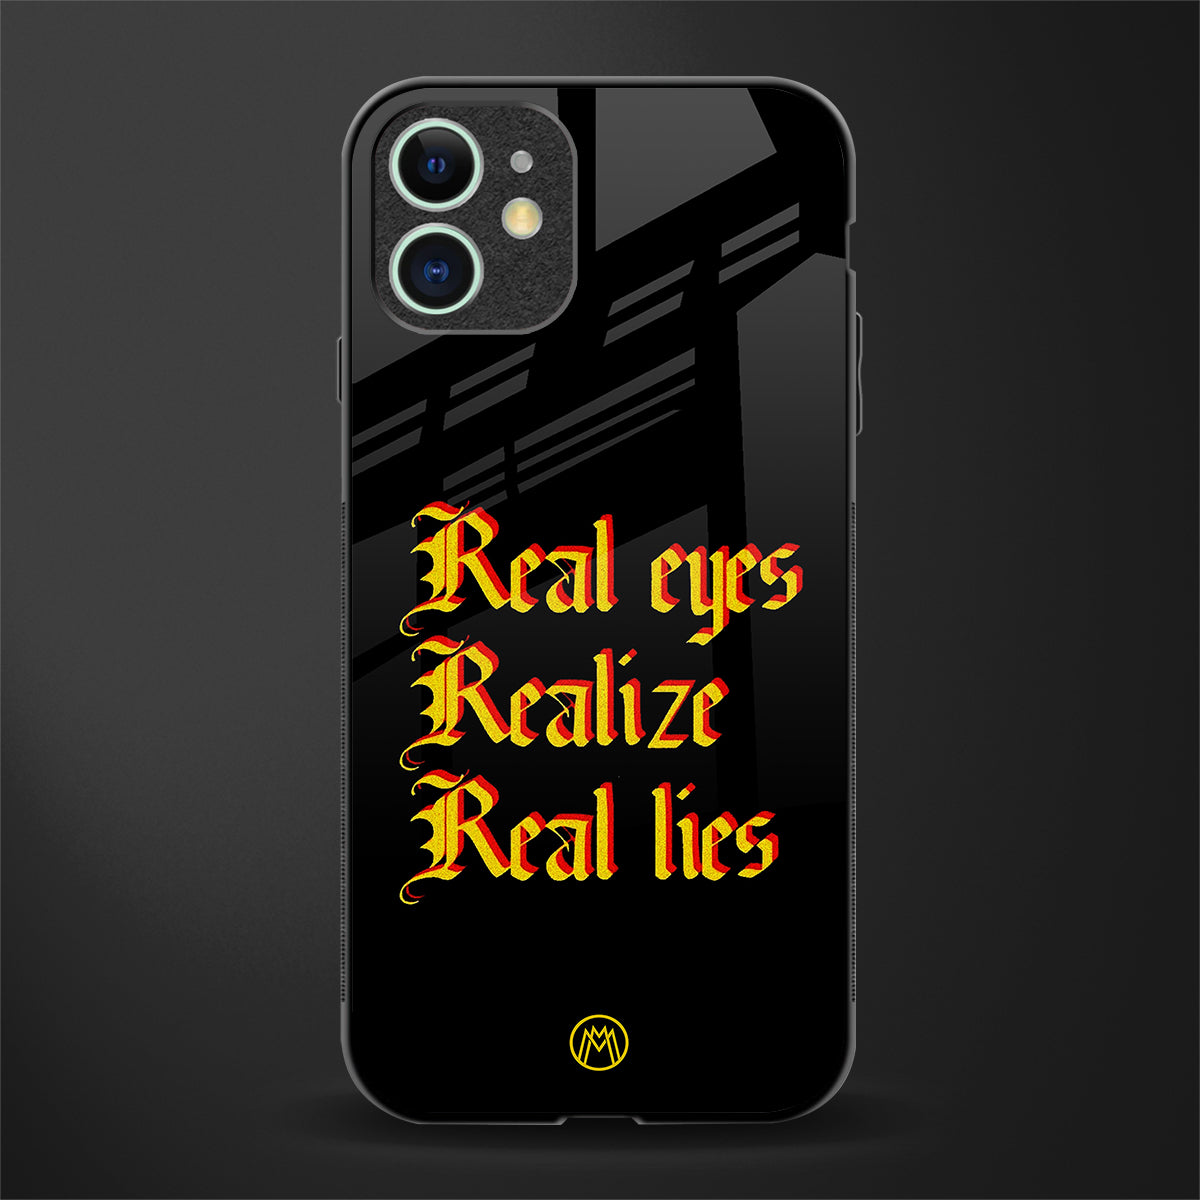 real eyes realize real lies quote glass case for iphone 12 mini image